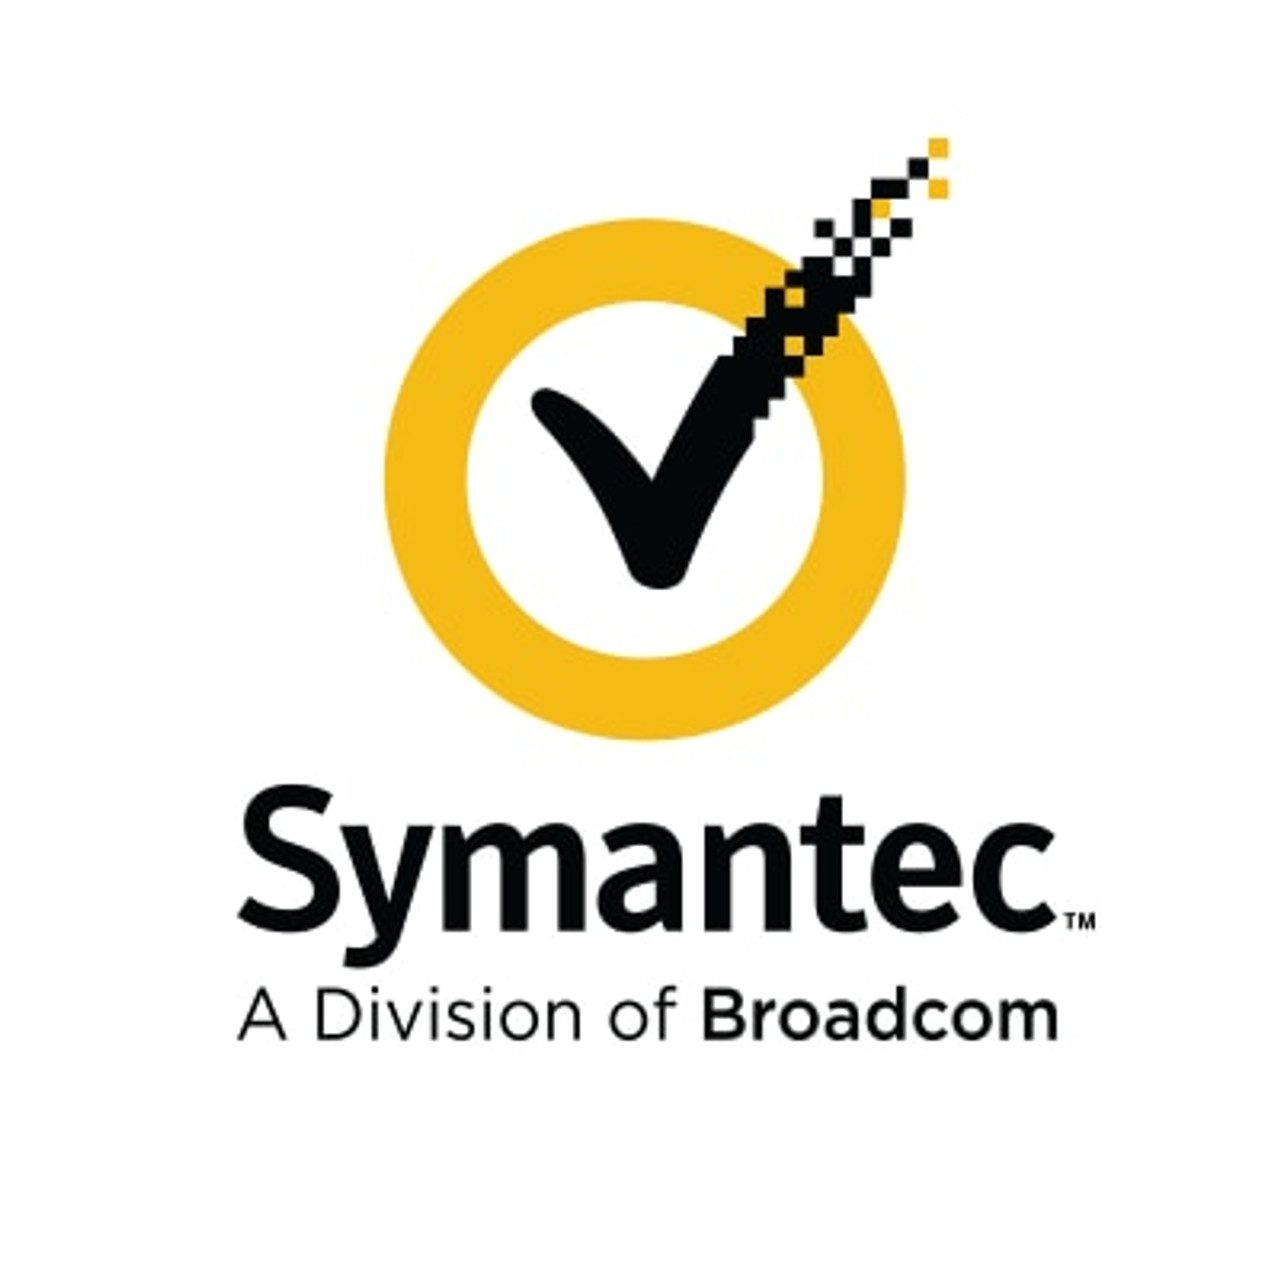 Symantec Complete Endpoint Defense (without SEP), Additional Quantity Hybrid Subscription License with Support, 25,000-49,999 Devices 1 YR